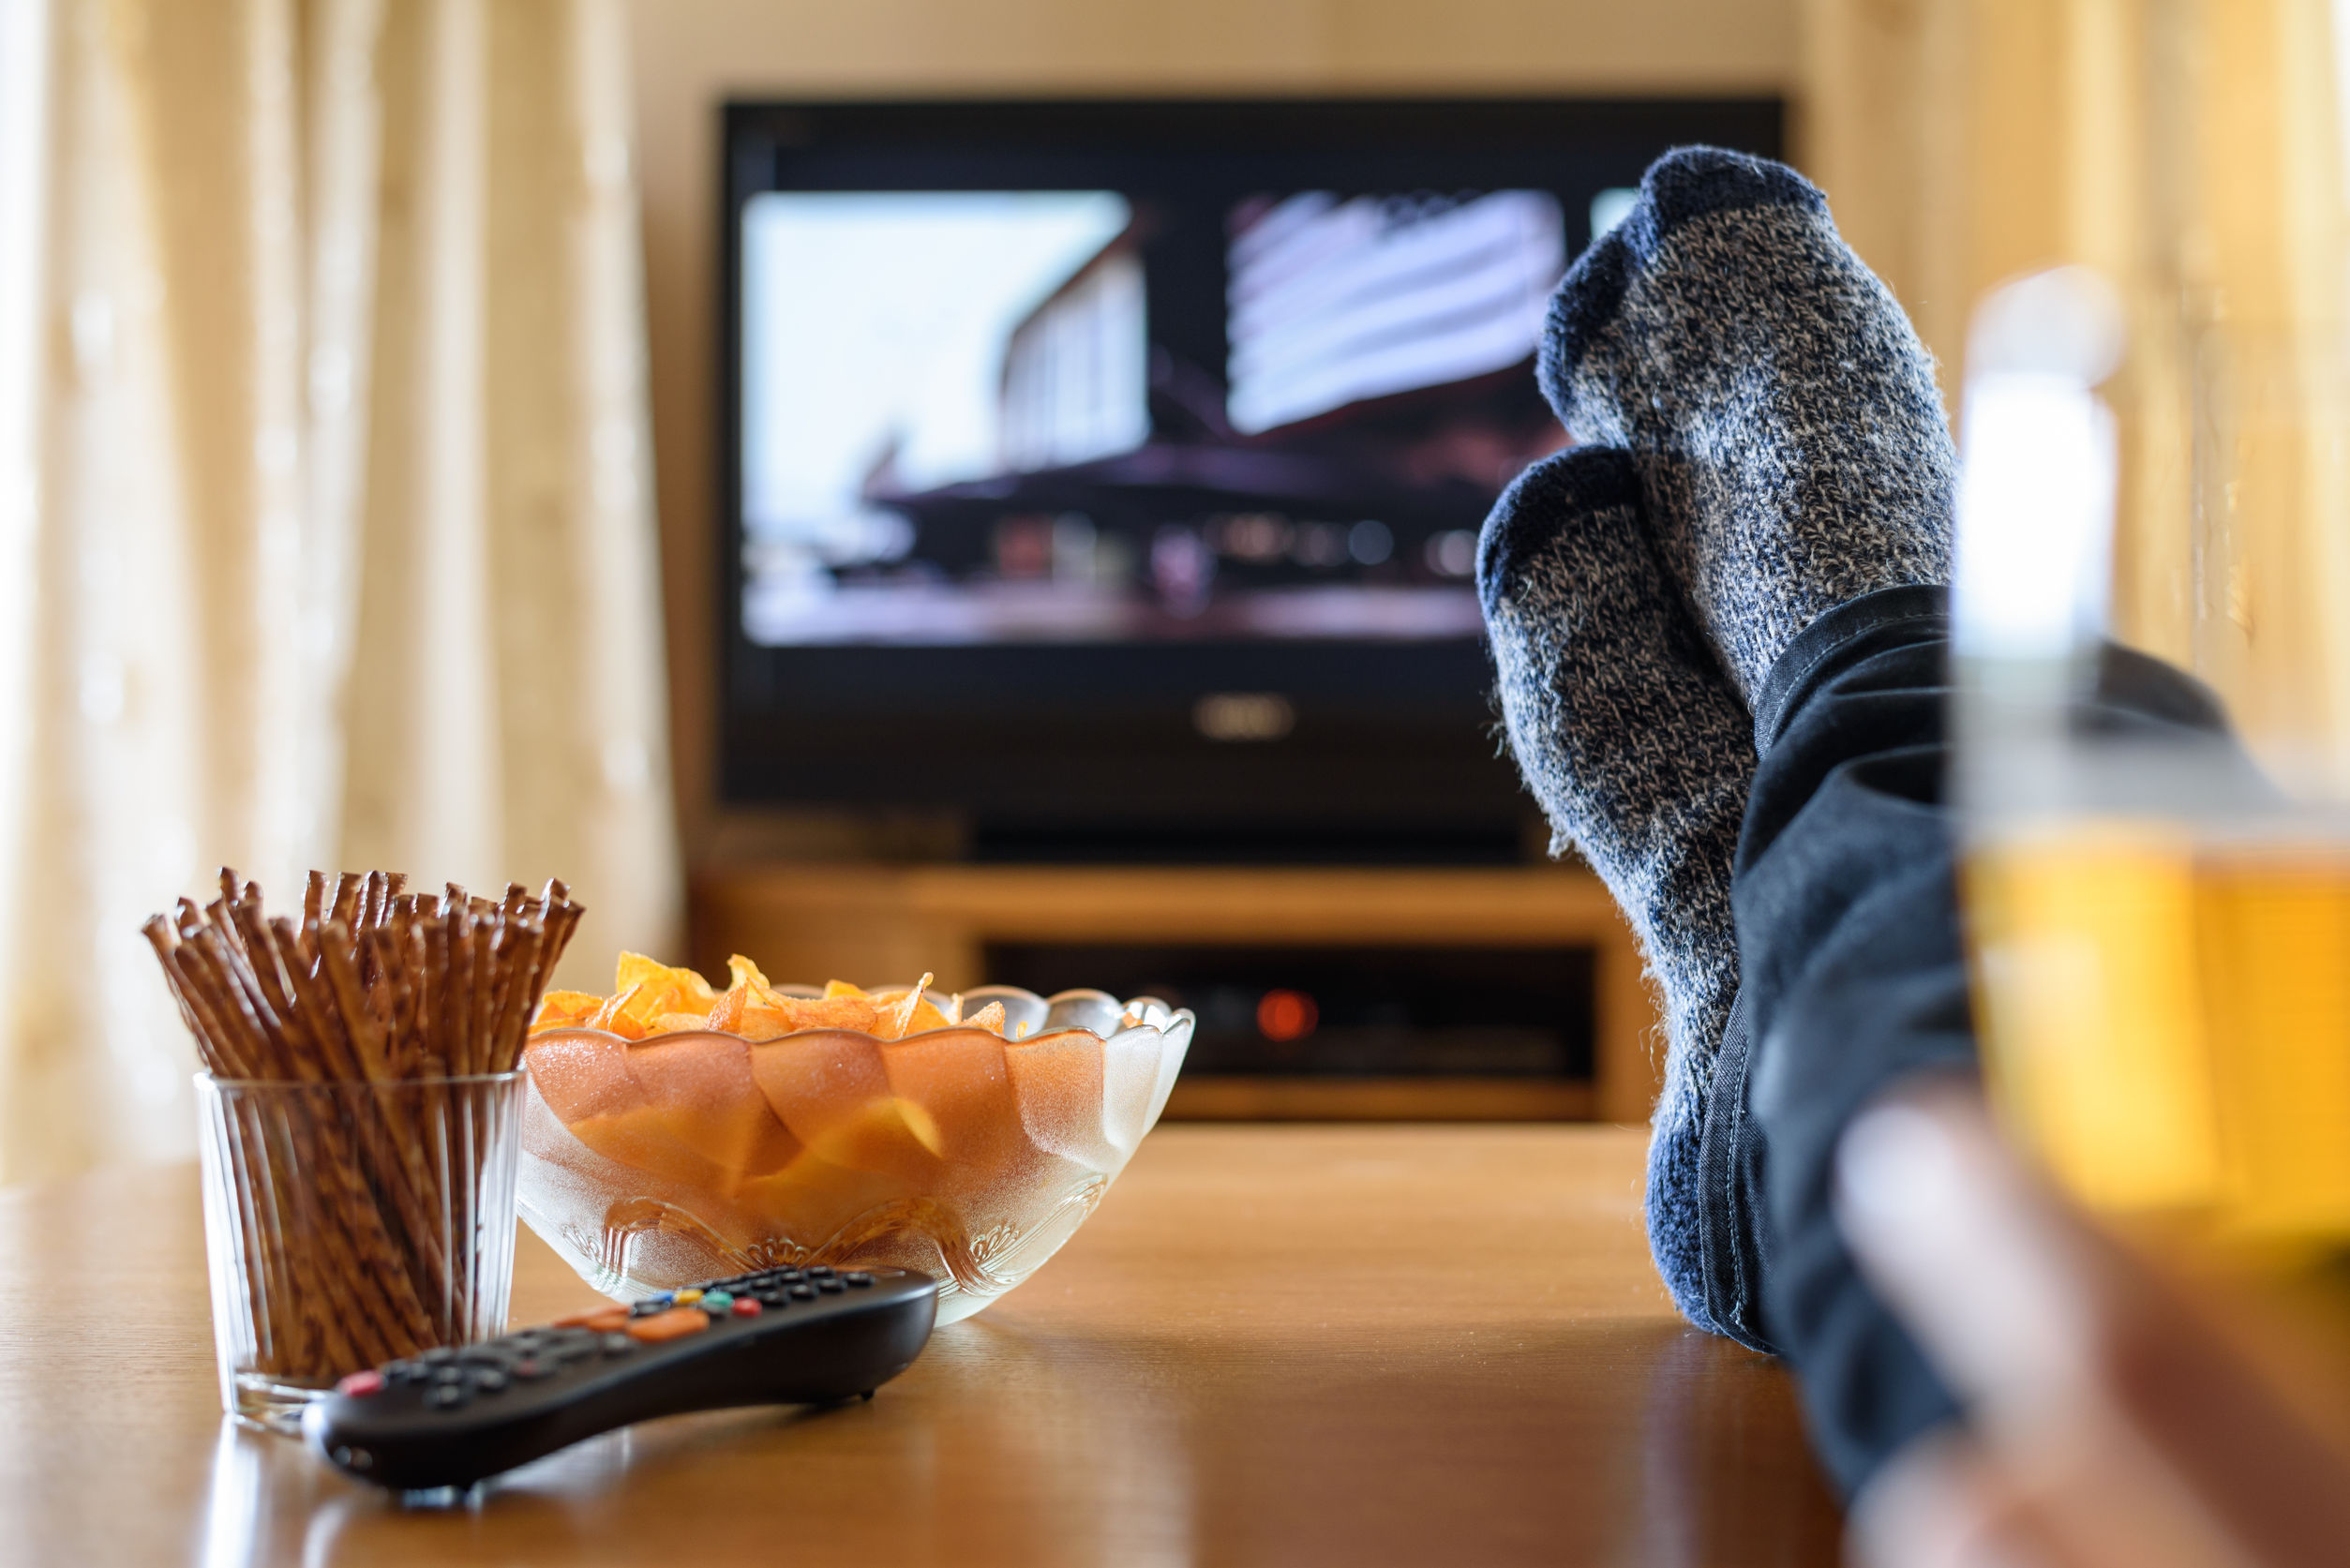 feet up on a coffee table with snacks on it and a tv in the background